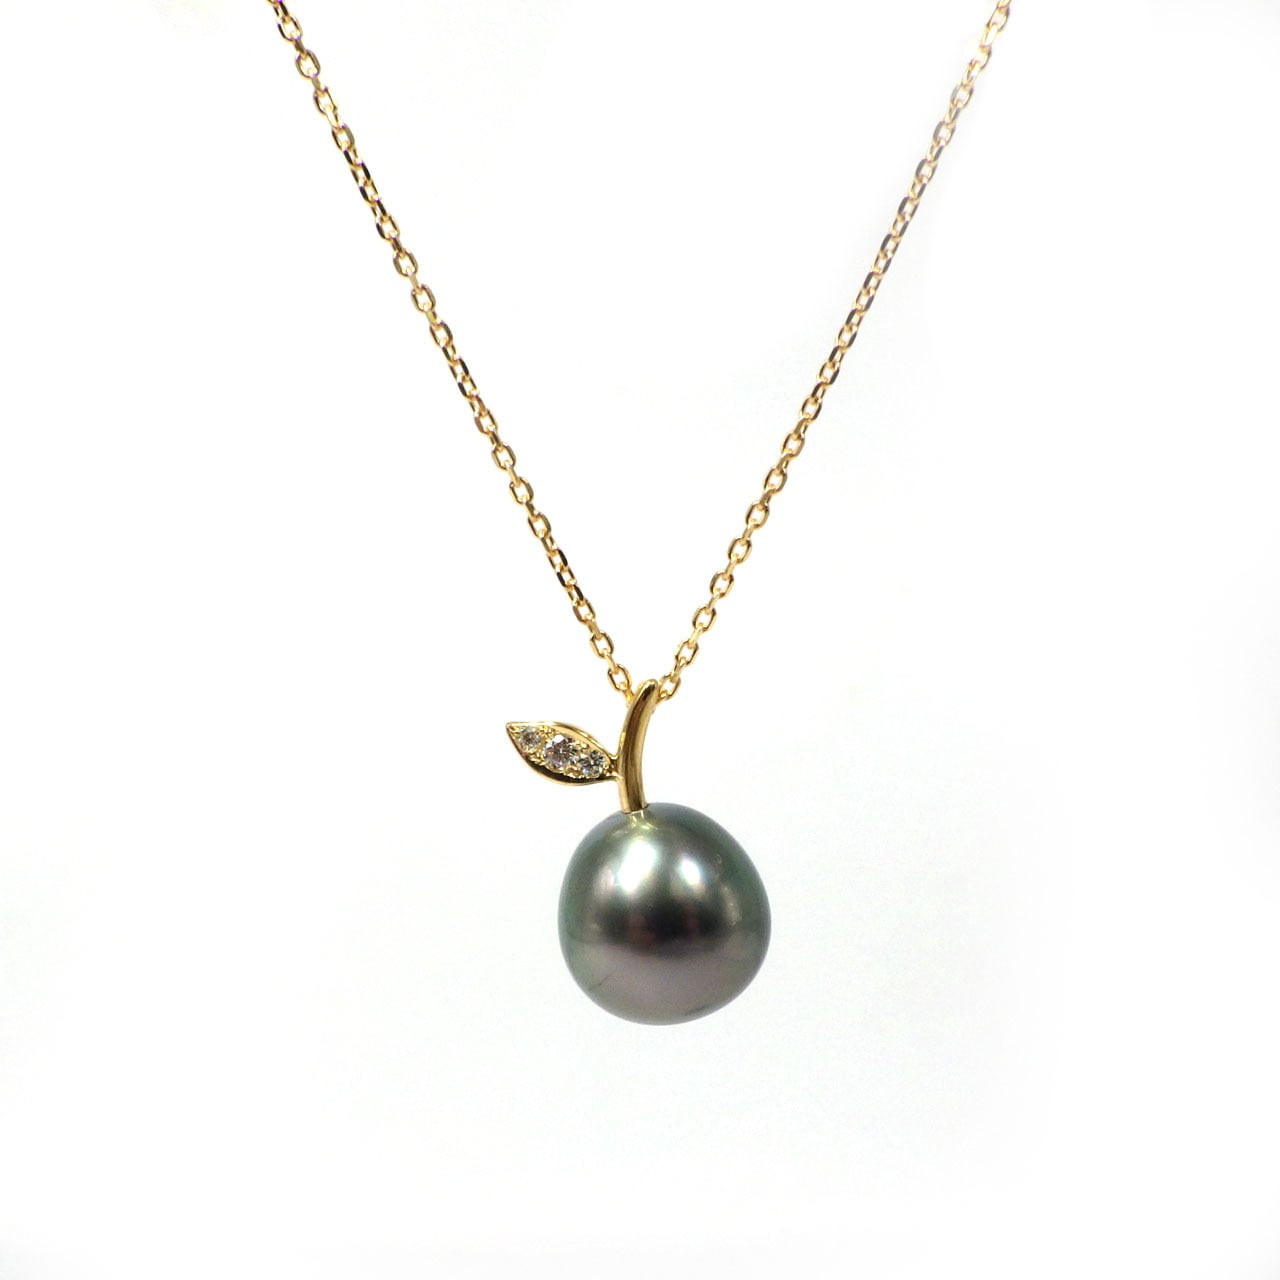 necklace ネックレス＆ペンダント | KAWABE JEWELRY online shop